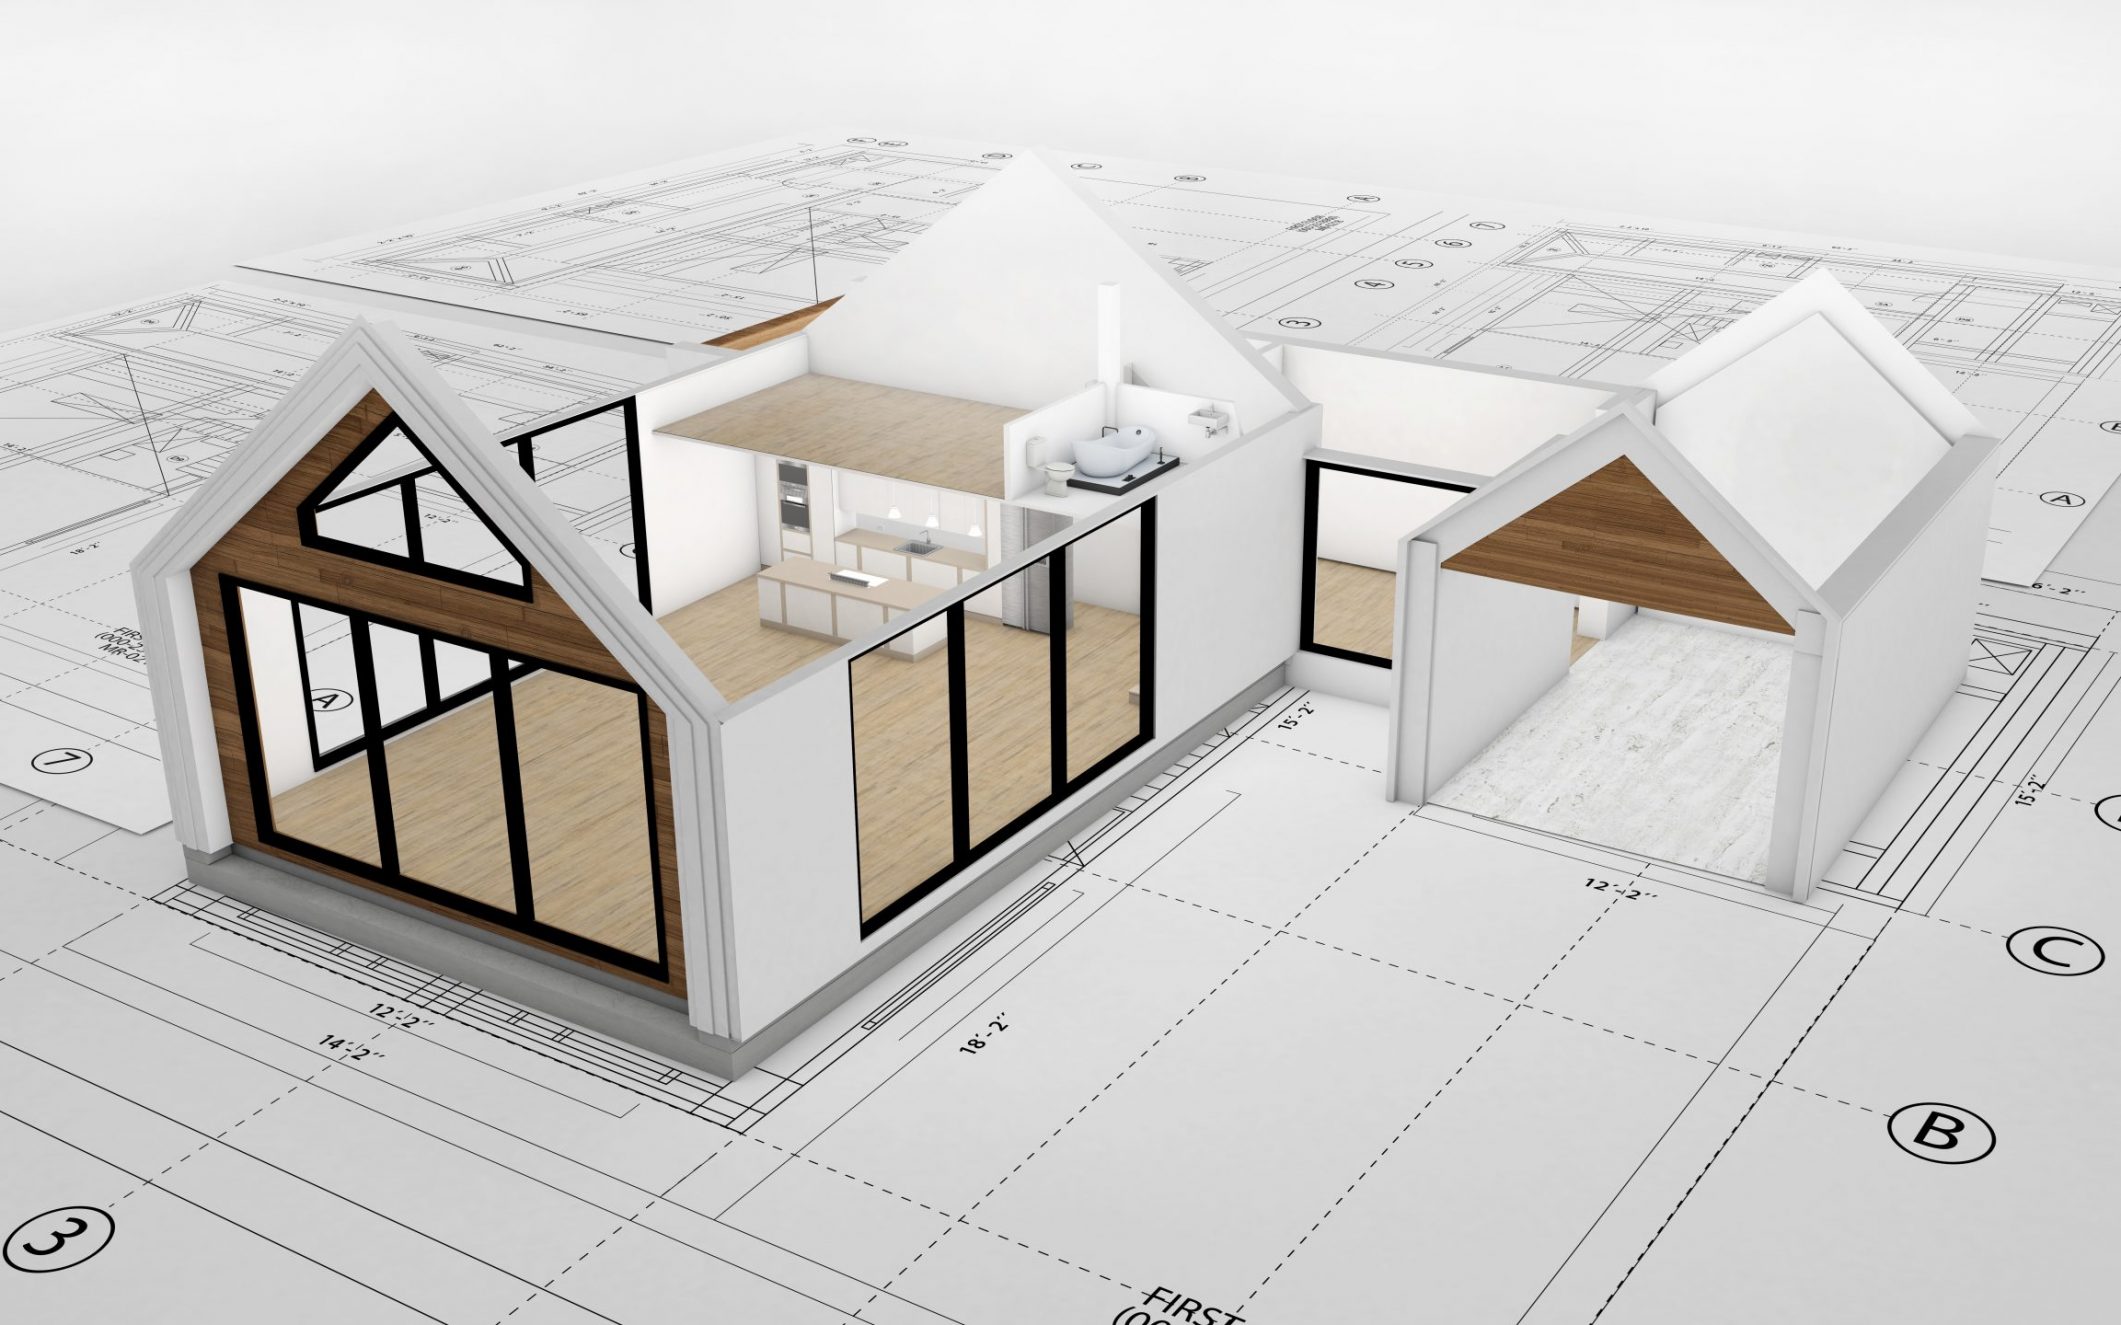 Blueprints with a 3D render of a beautiful two story house on top - architecture concepts